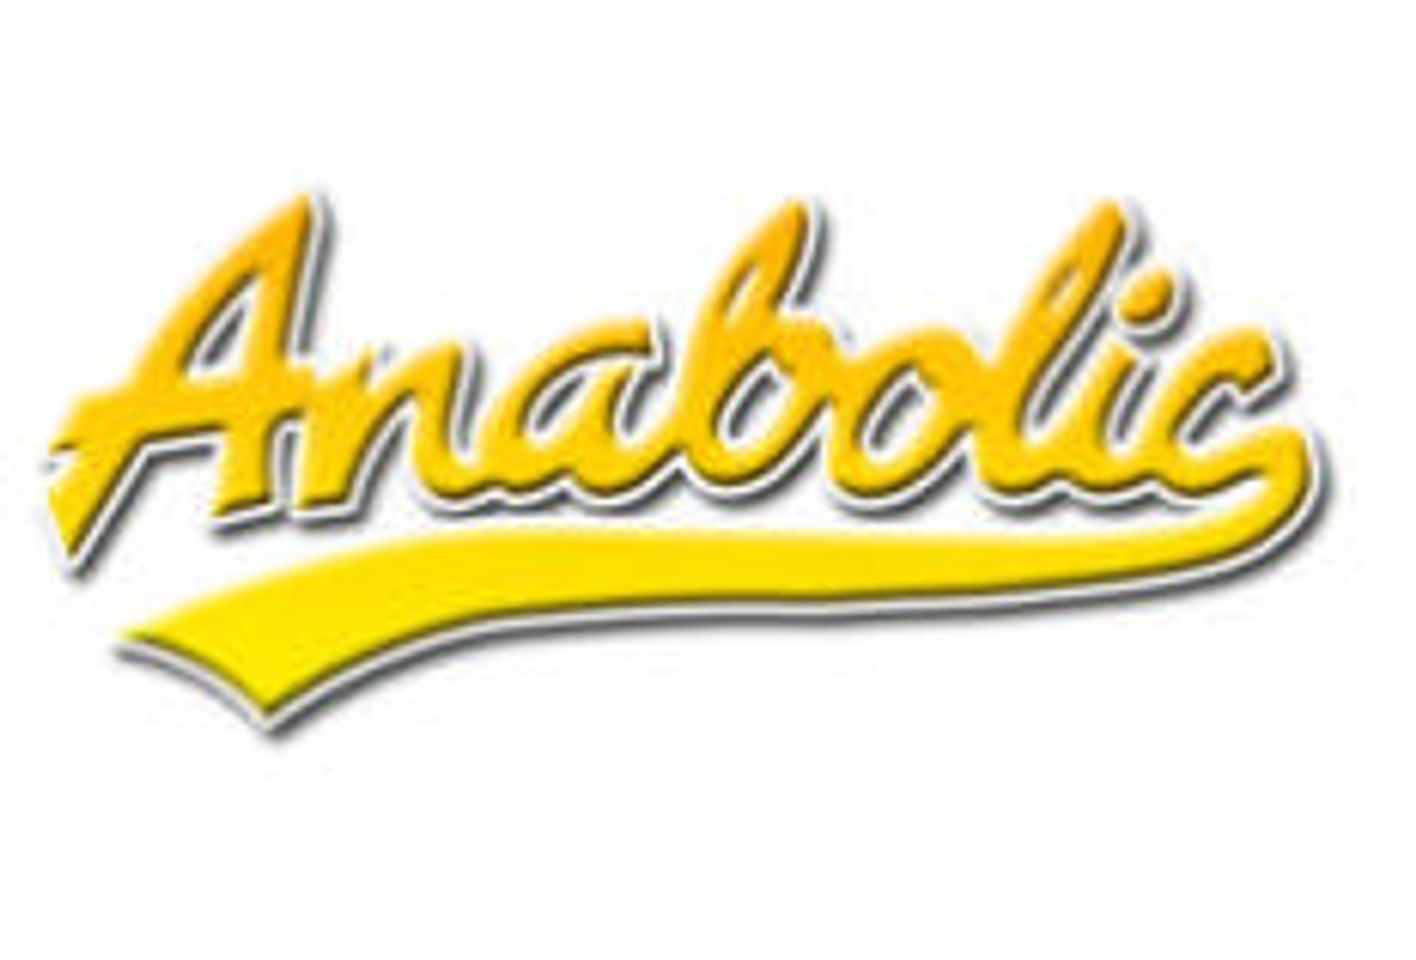 Anabolic Introduces New Website